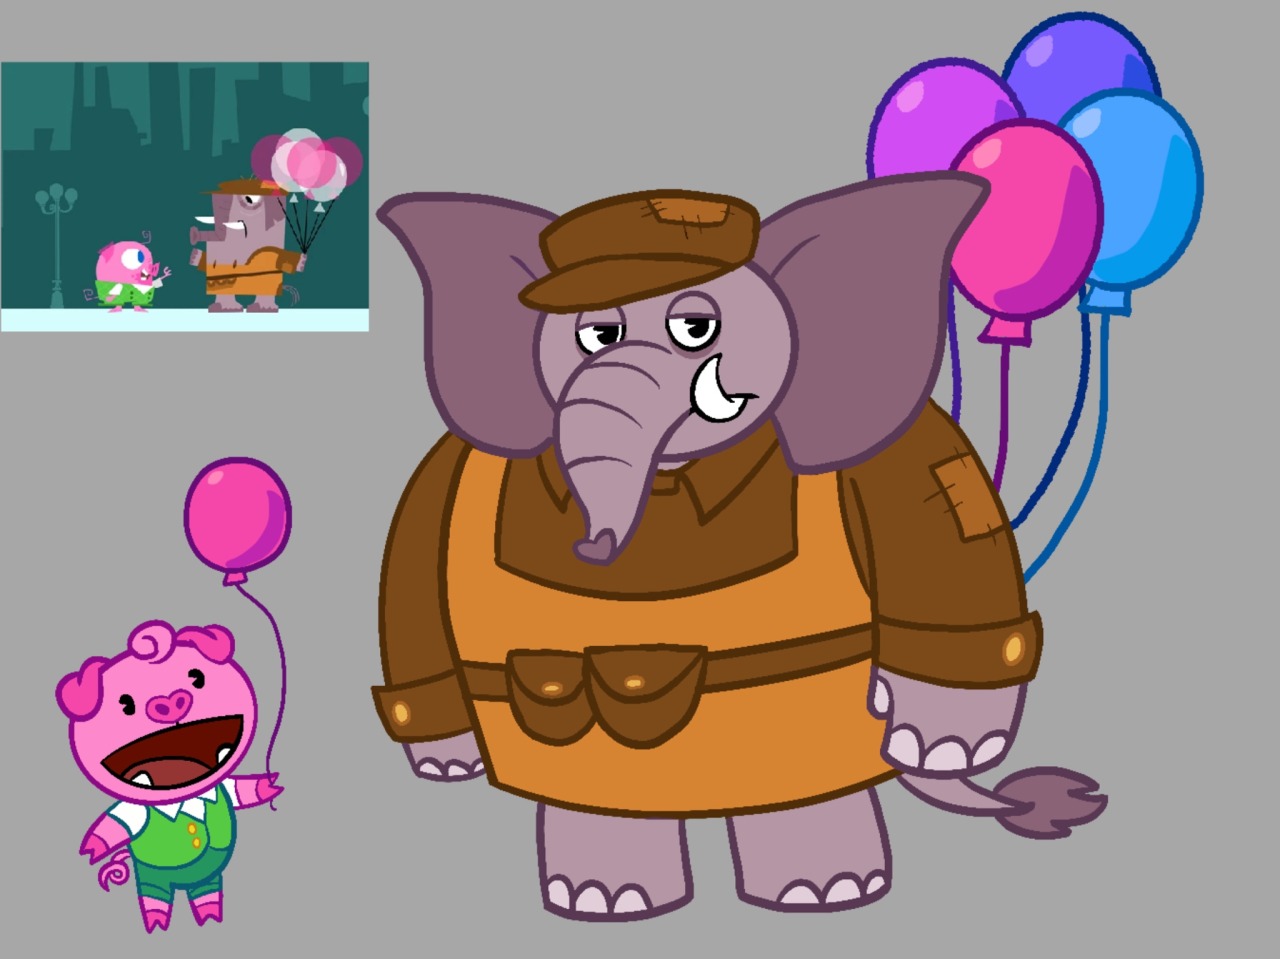 The pig and elephant from "Mole in the Big City" in the classic HTF art style.